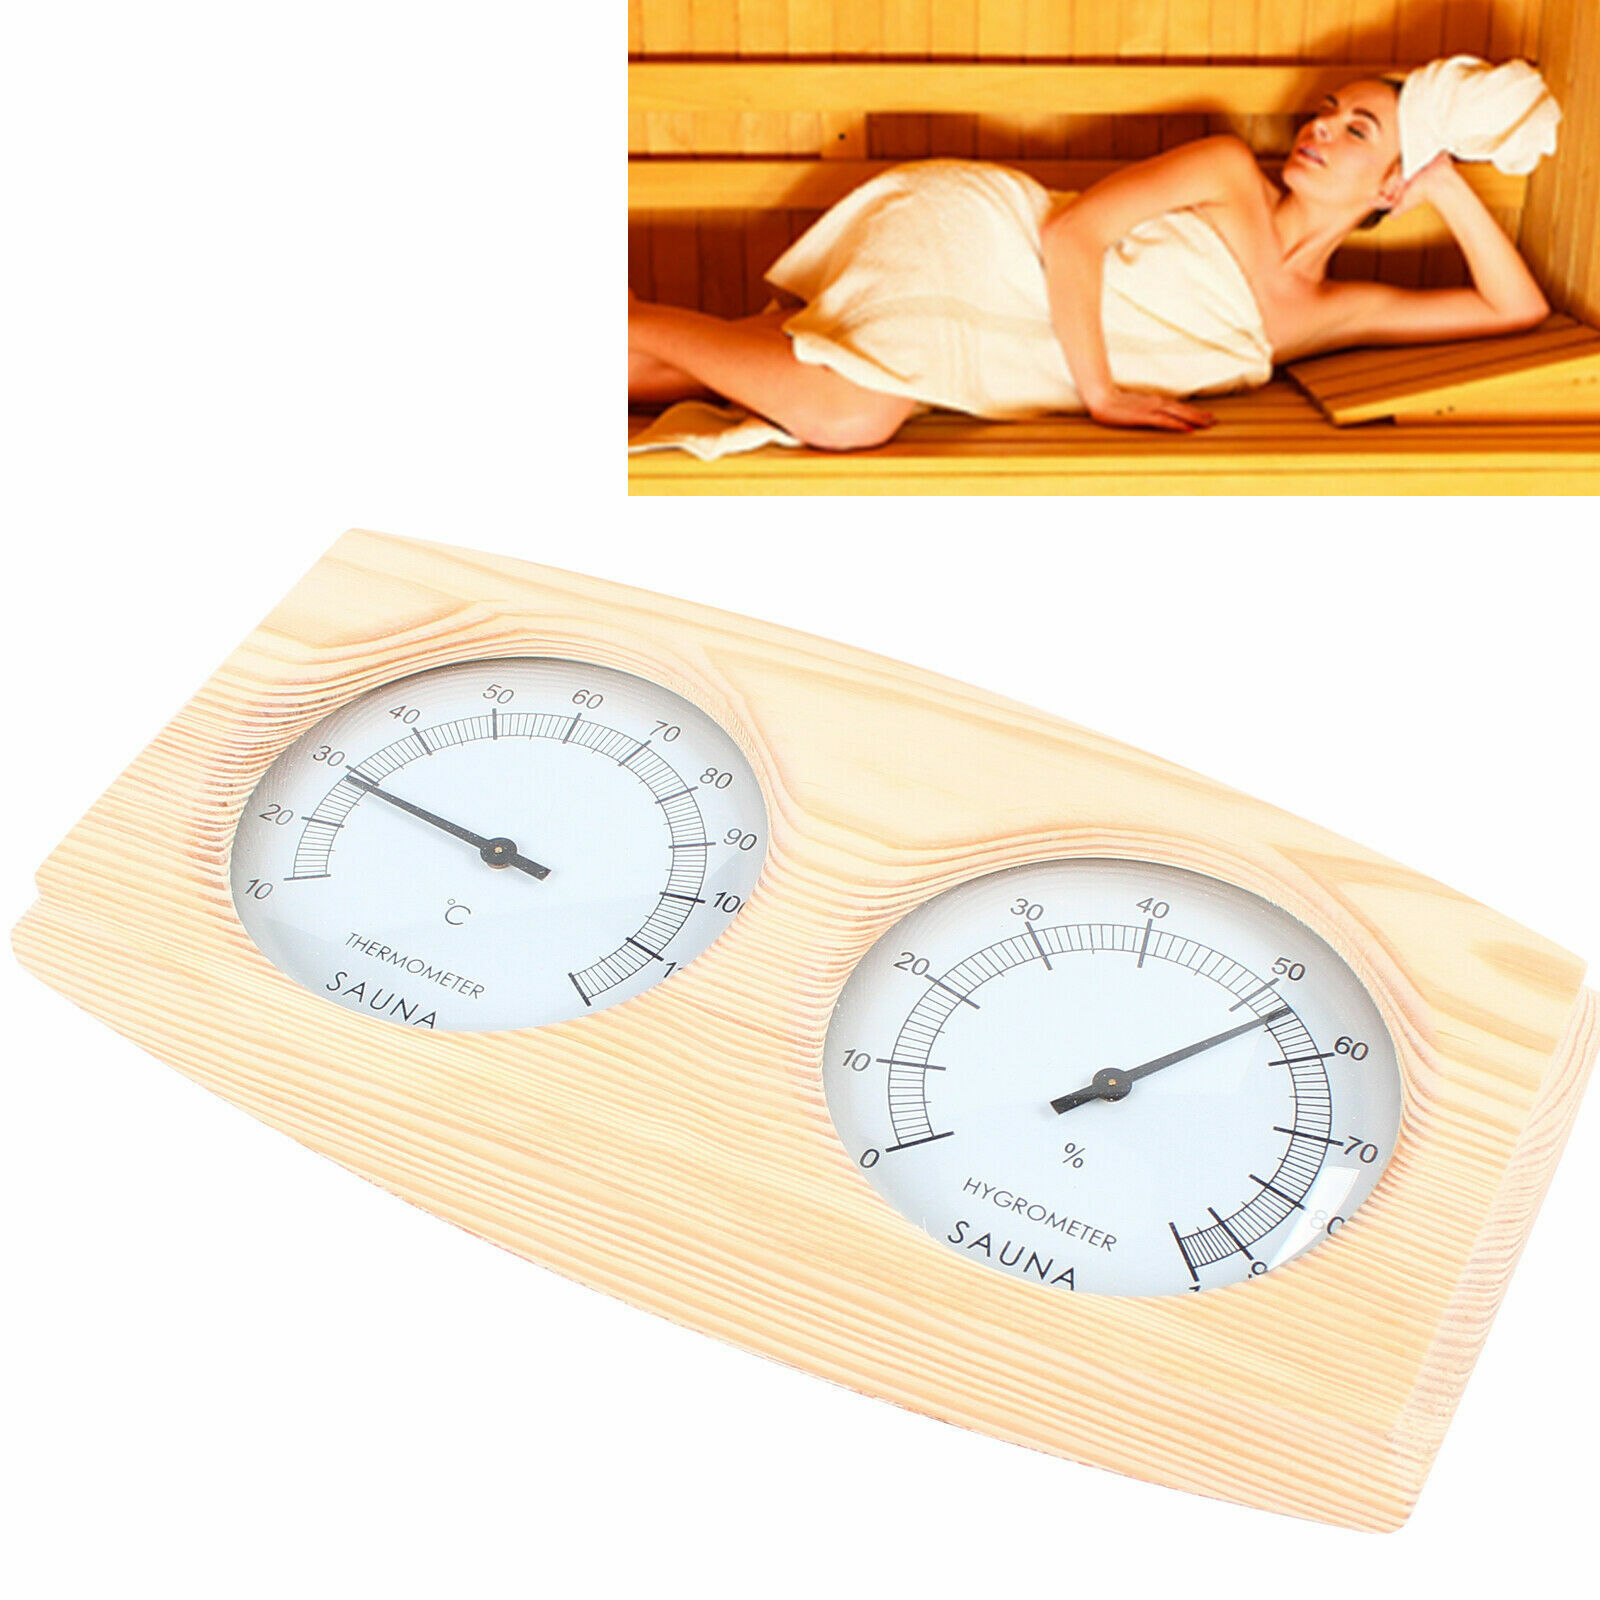 Sauna Room 2 In 1 Wooden Sauna Hygrothermograph Thermometer Hygrometer Accessory